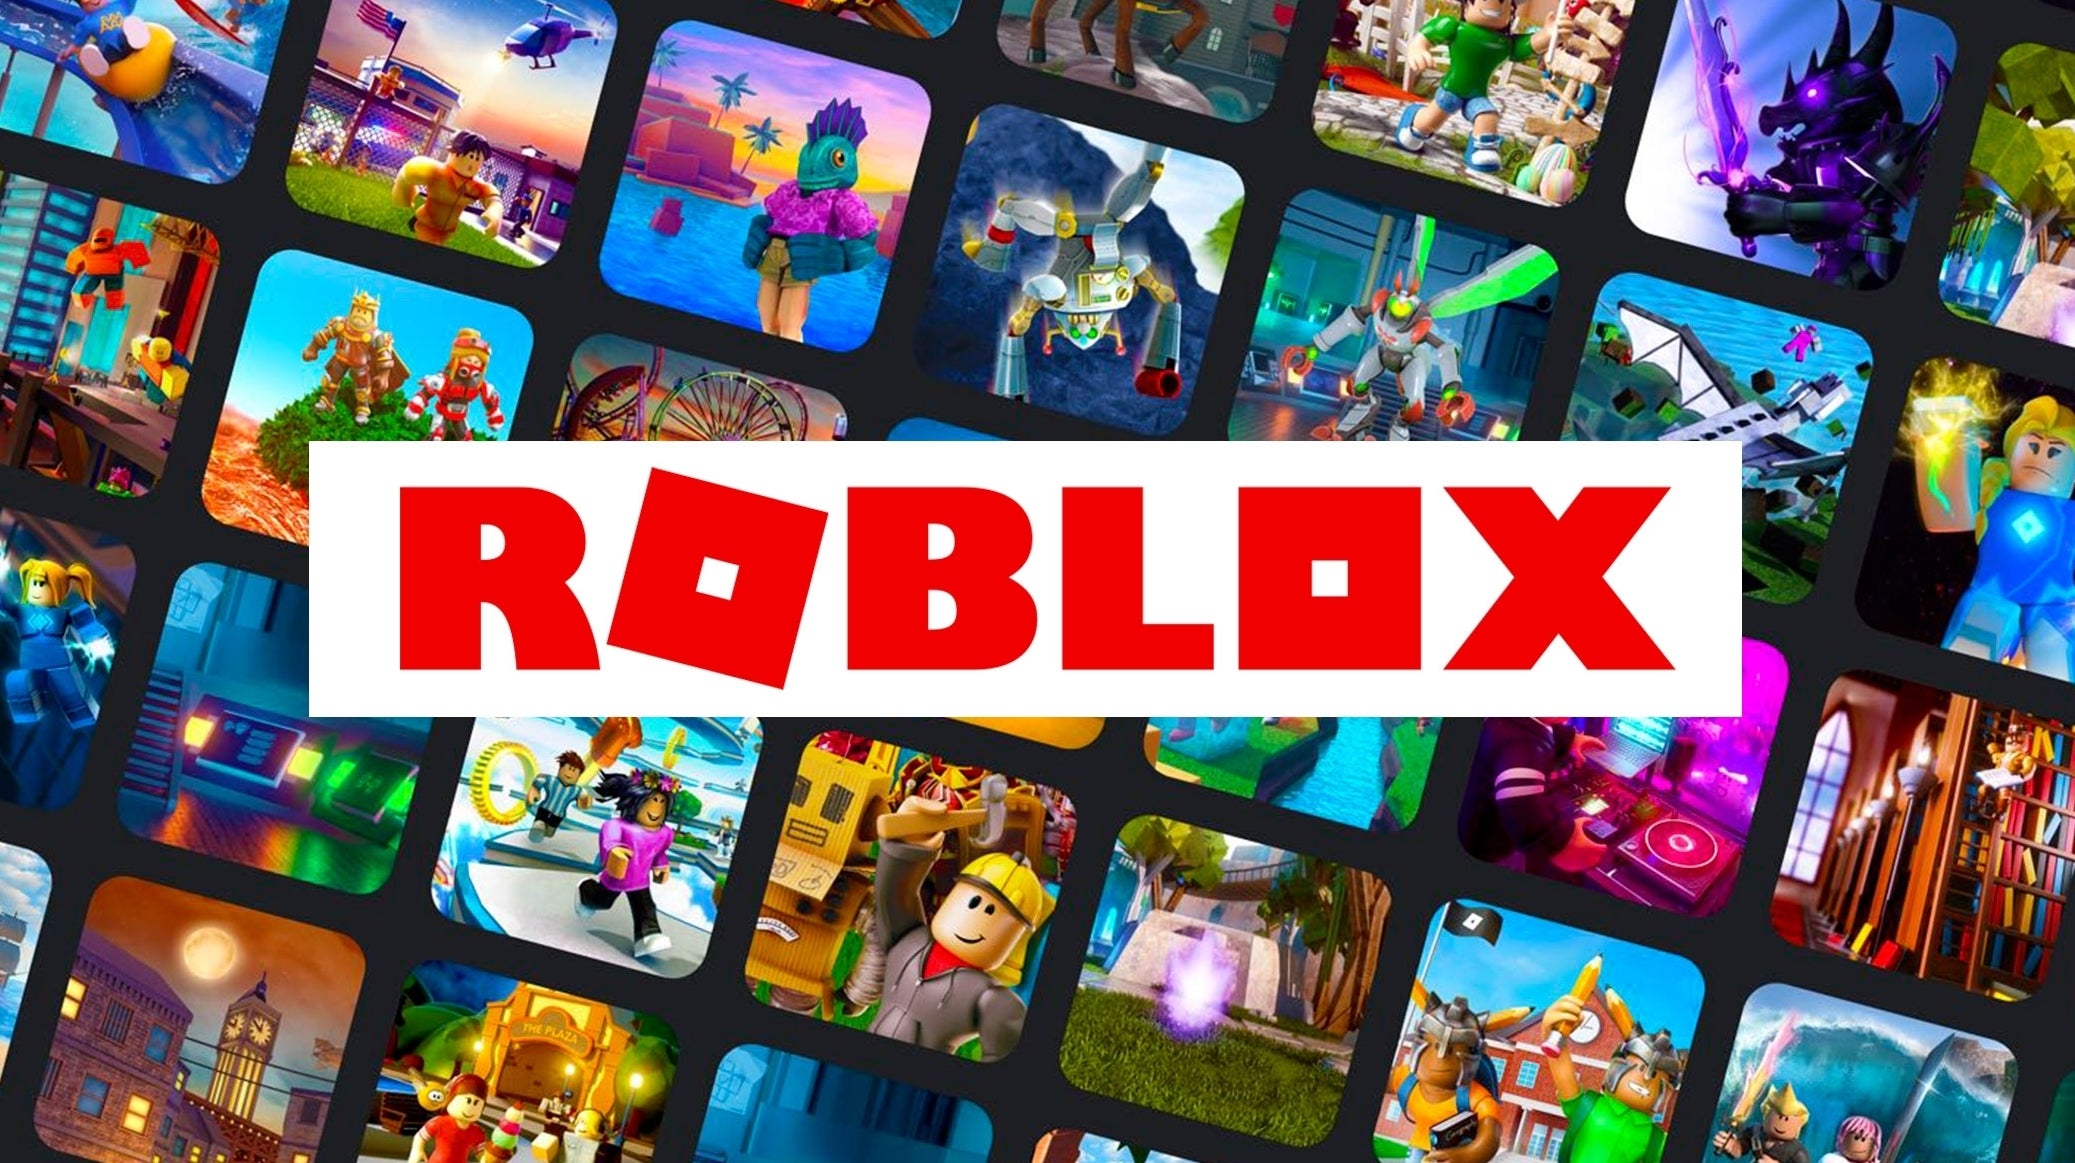 Image for Roblox suing controversial content creator for leading a "cybermob" against platform